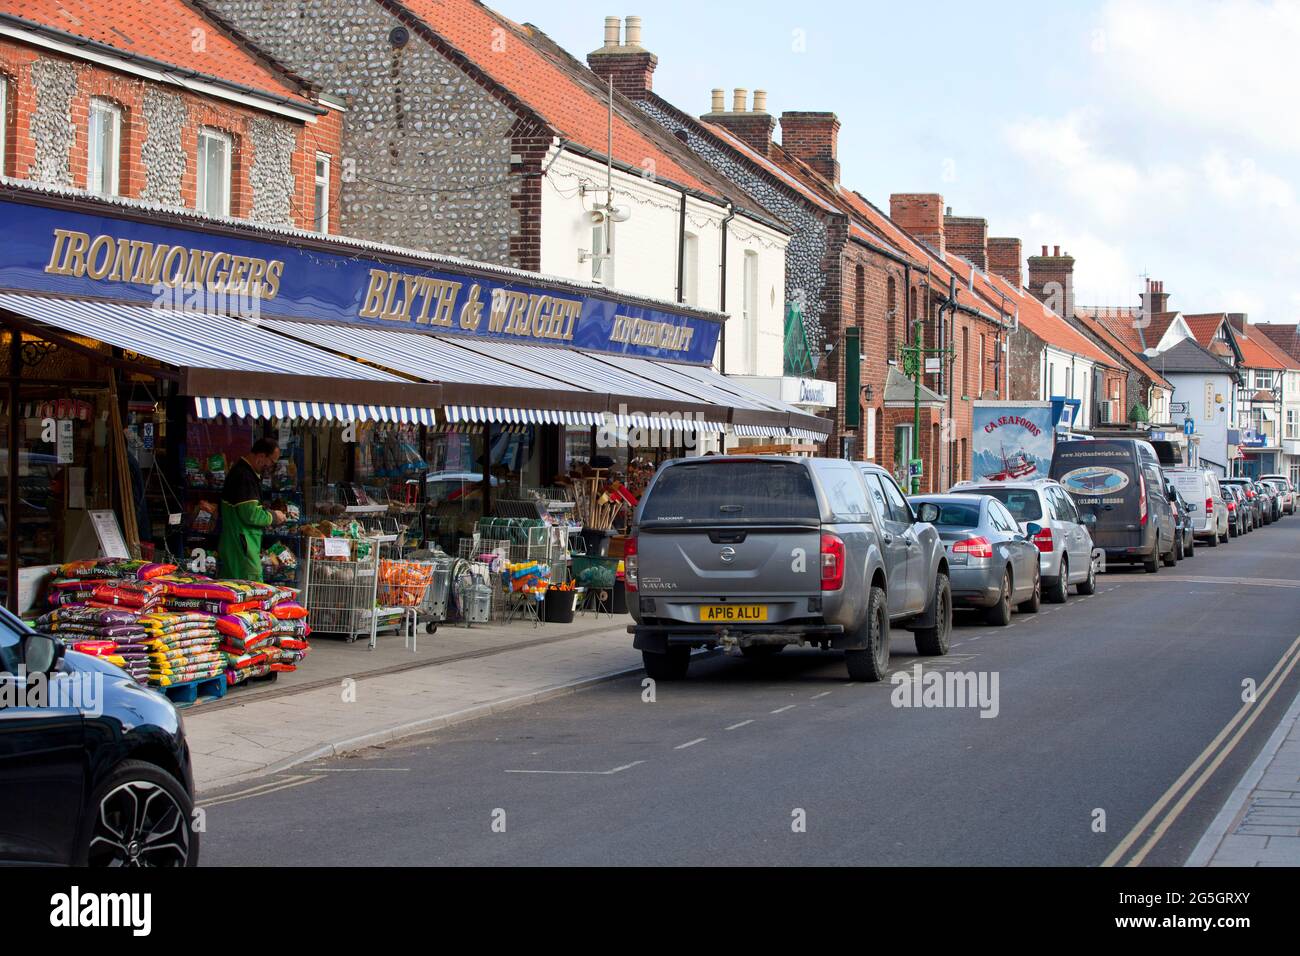 Blyth and Wright store on Station Road in Sheringham on the North Norfolk coast, England.  image taken April 2021 Stock Photo